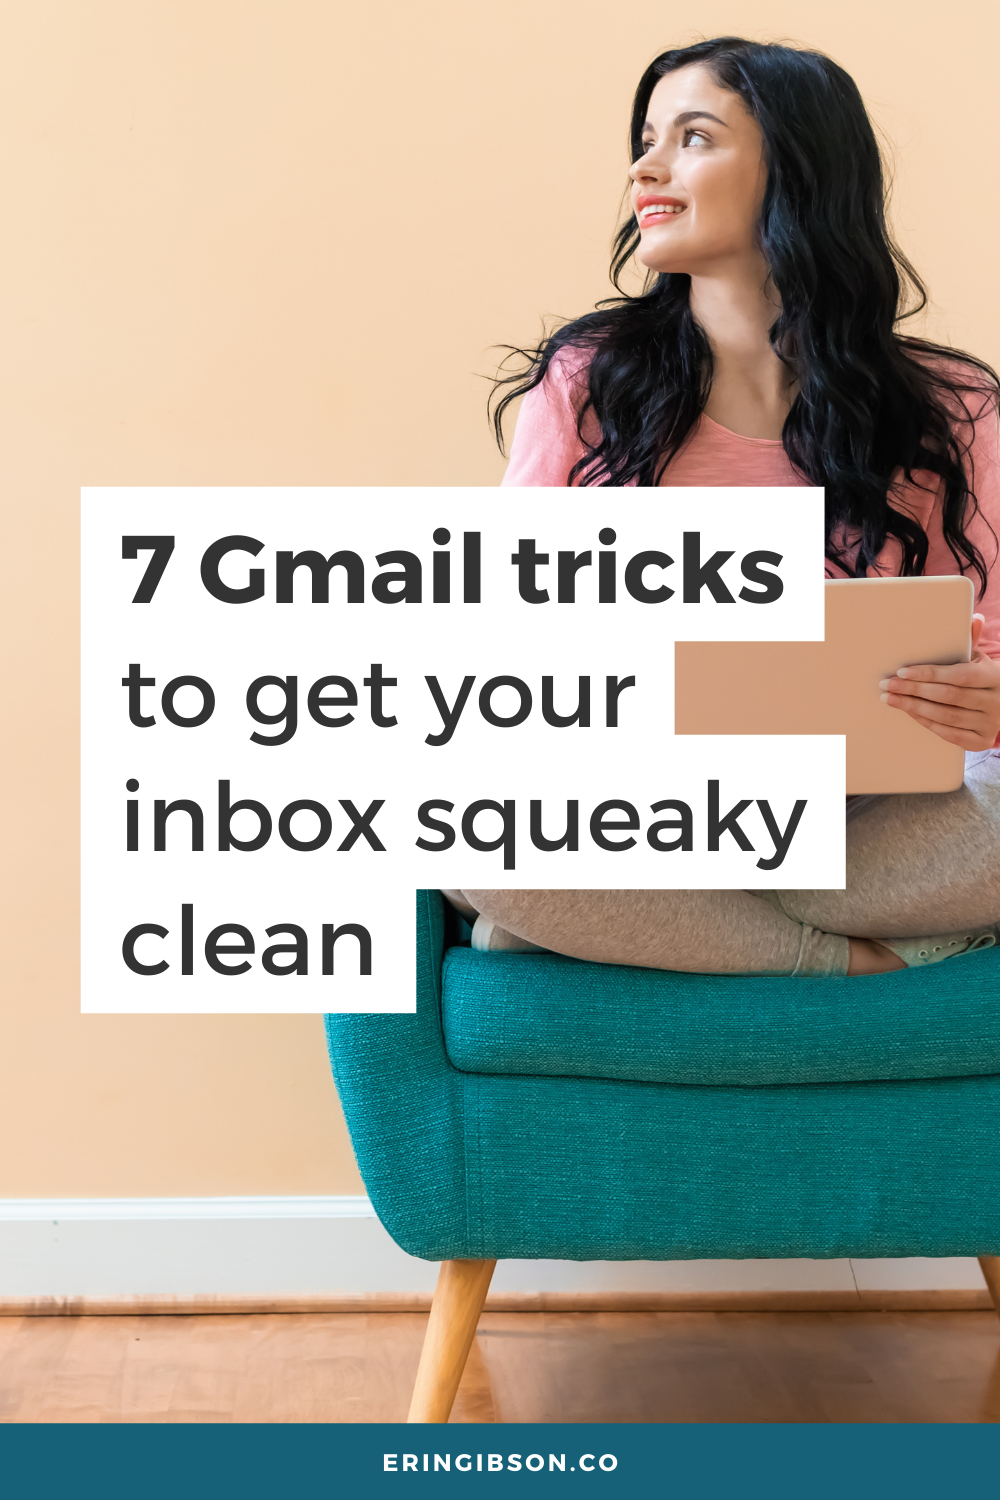 7 Gmail tricks to get your inbox squeaky clean